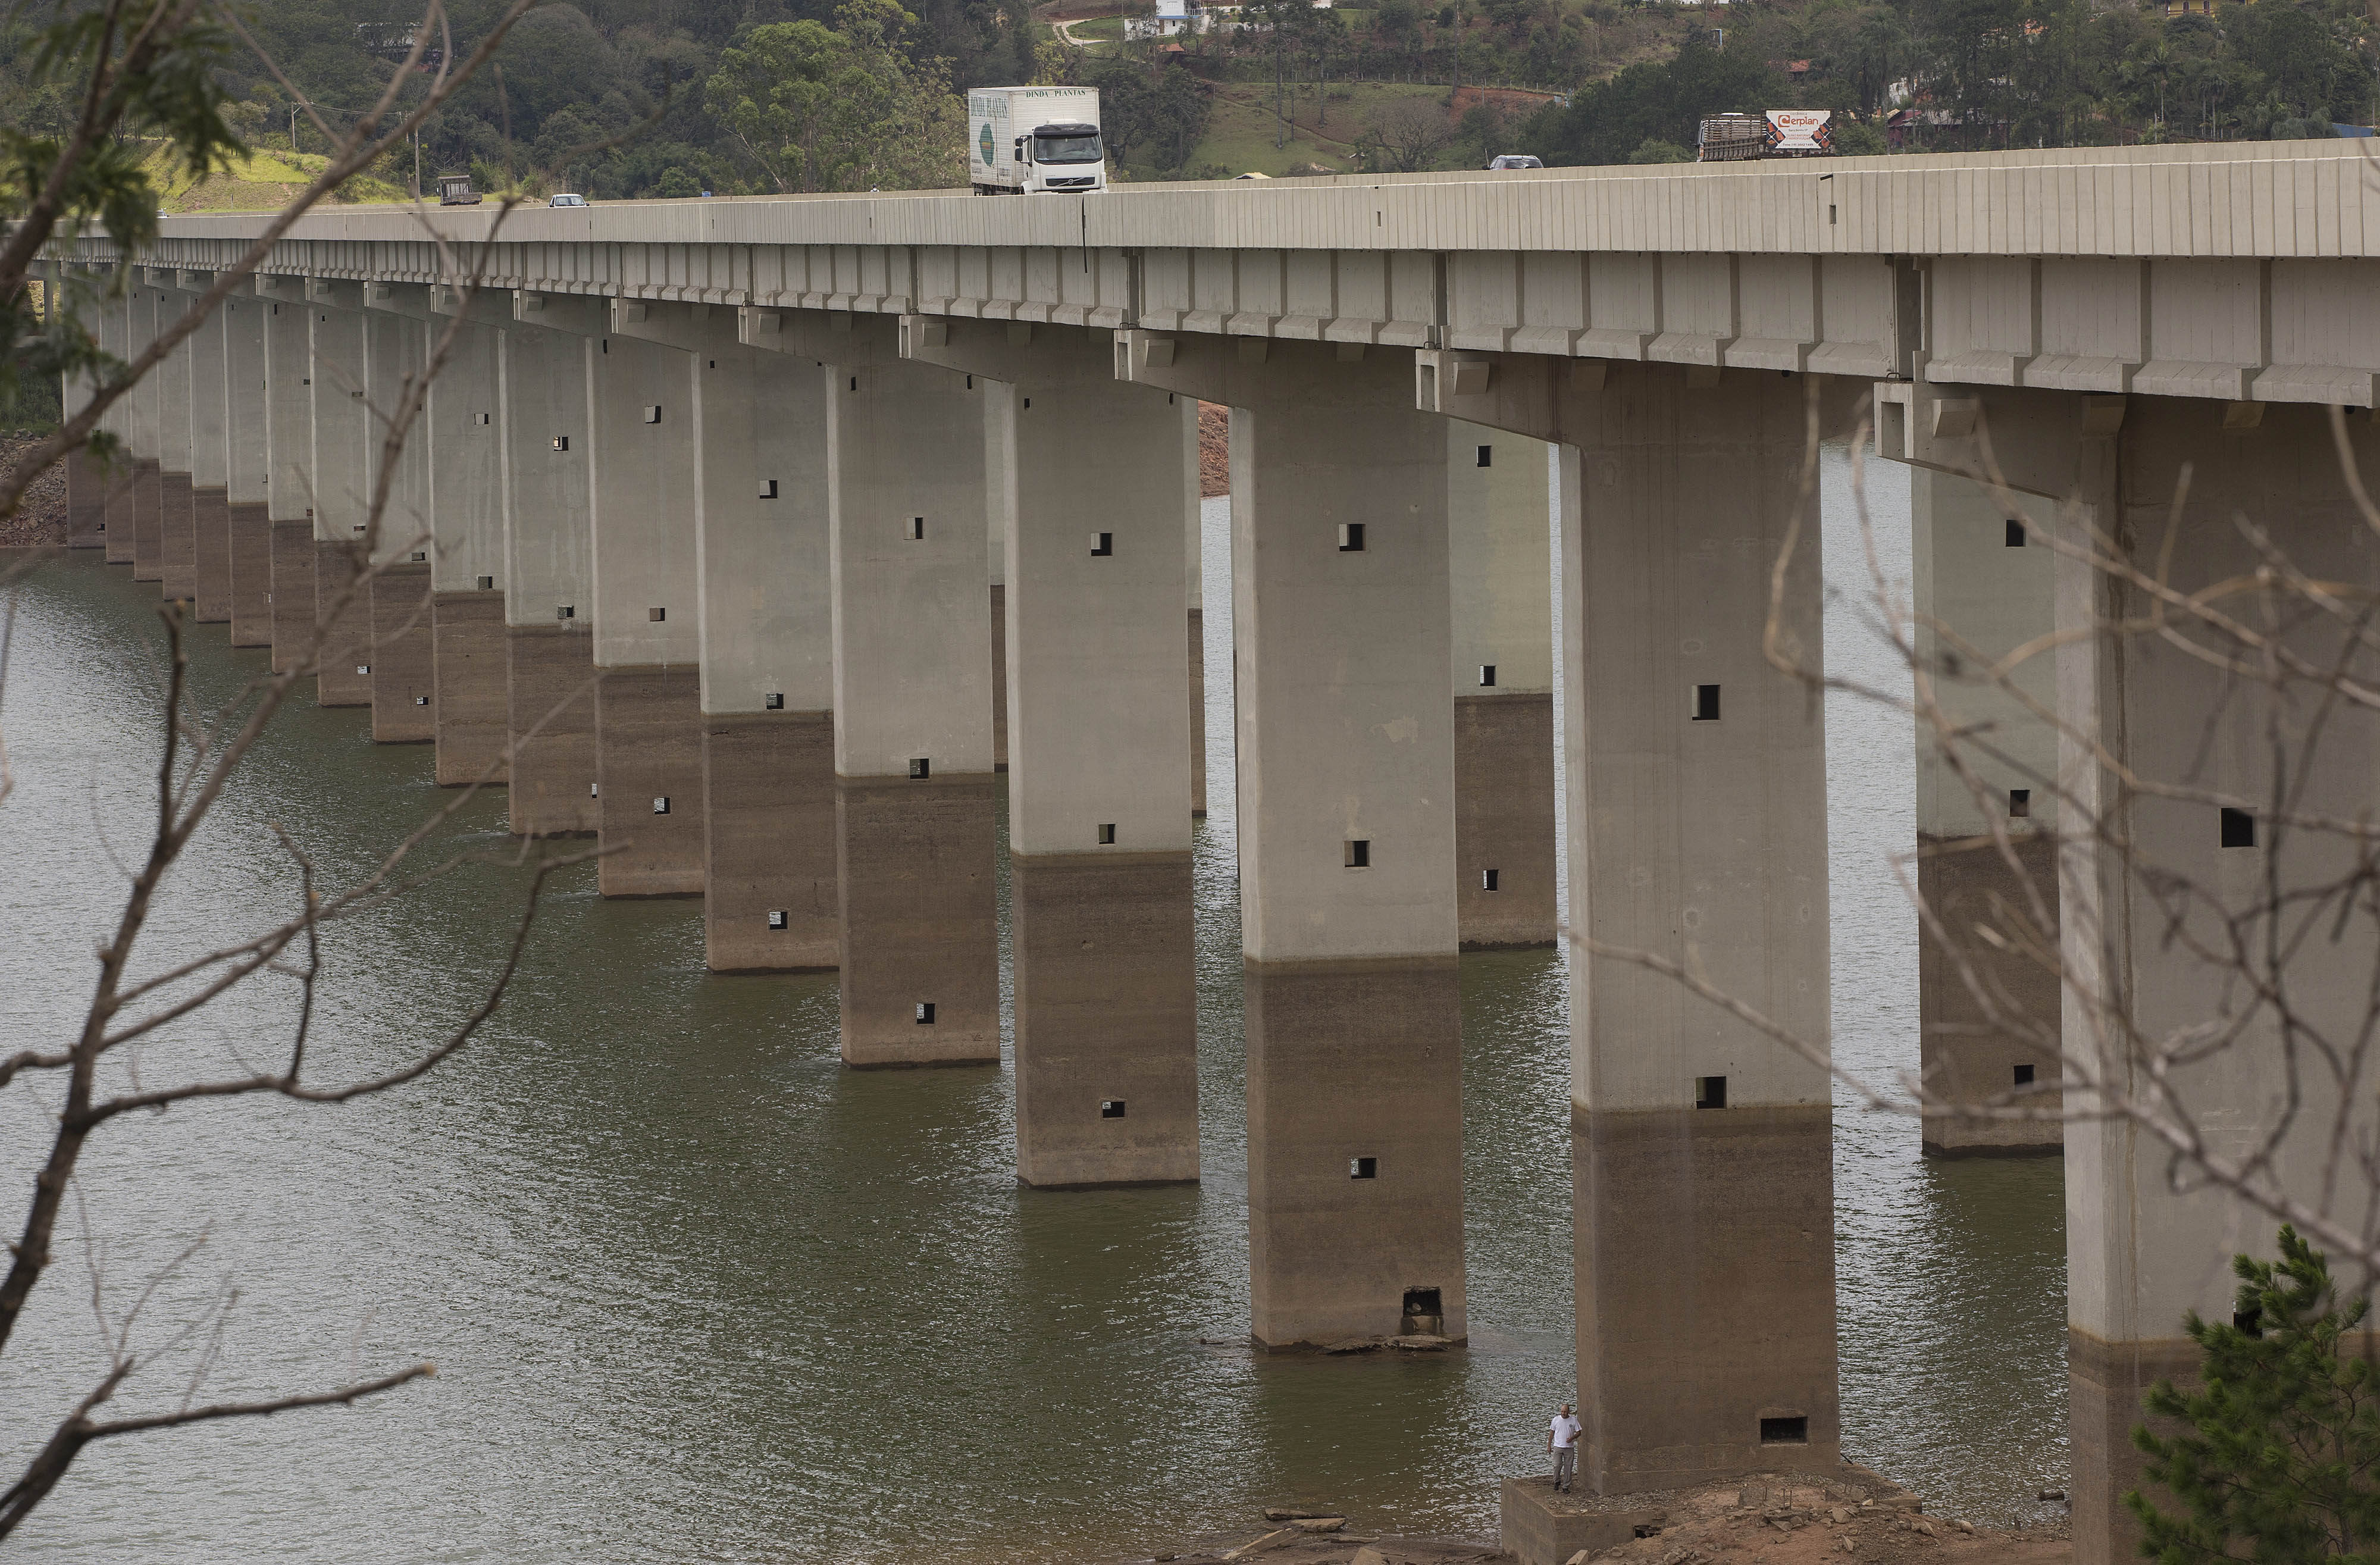 A bridge's columns show the previous water line over the Atibainha reservoir, part of the Cantareira System that provides water to the Sao Paulo metropolitan area, AP Photo/Andre Penner